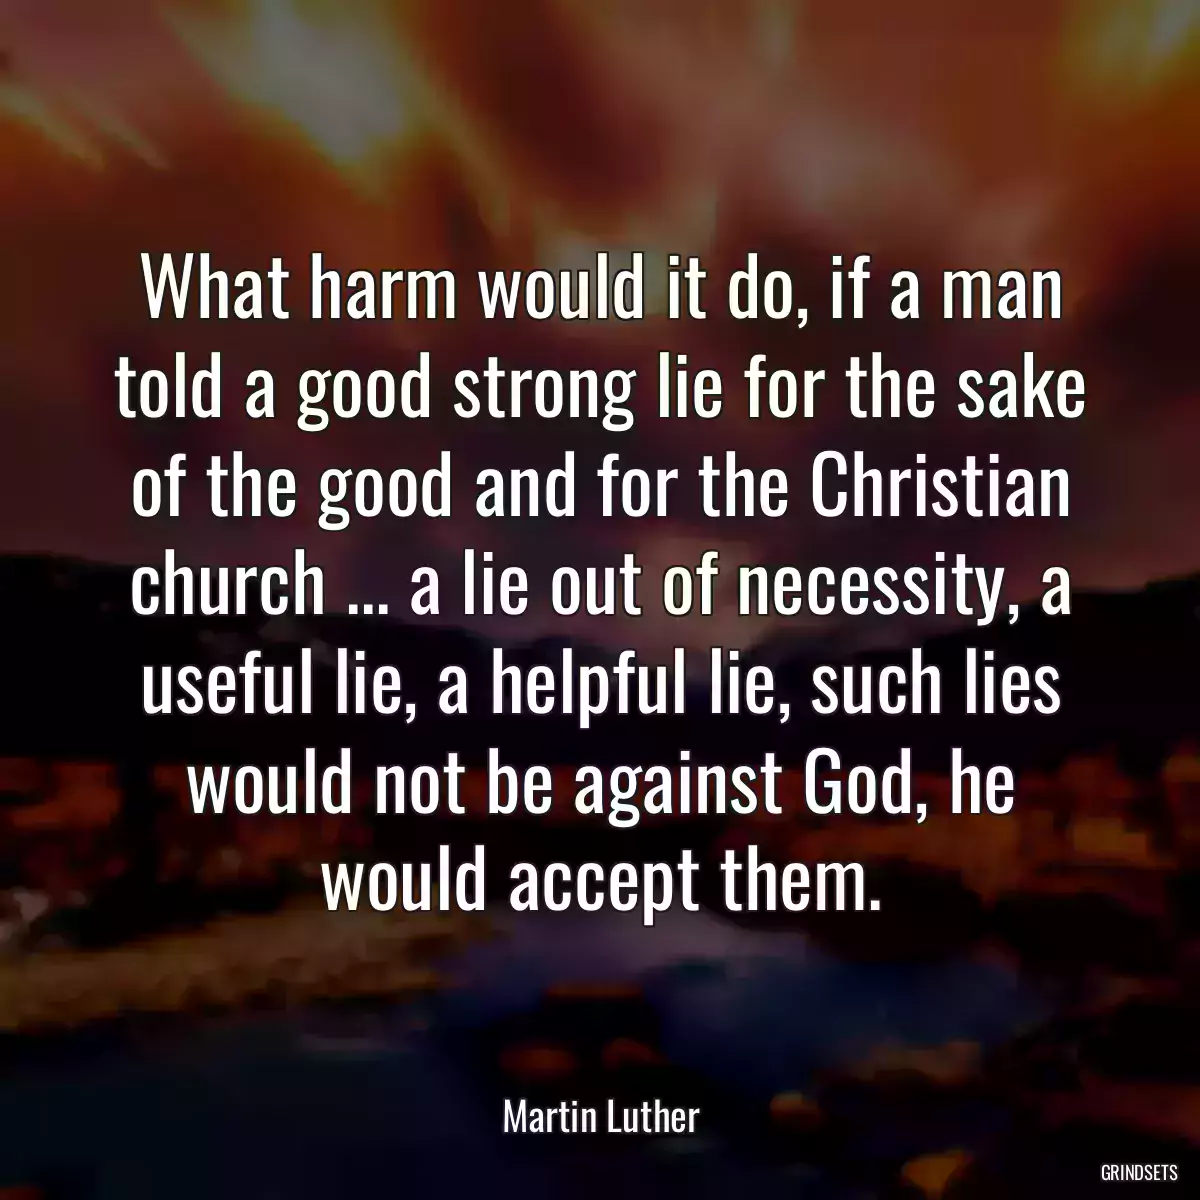 What harm would it do, if a man told a good strong lie for the sake of the good and for the Christian church ... a lie out of necessity, a useful lie, a helpful lie, such lies would not be against God, he would accept them.